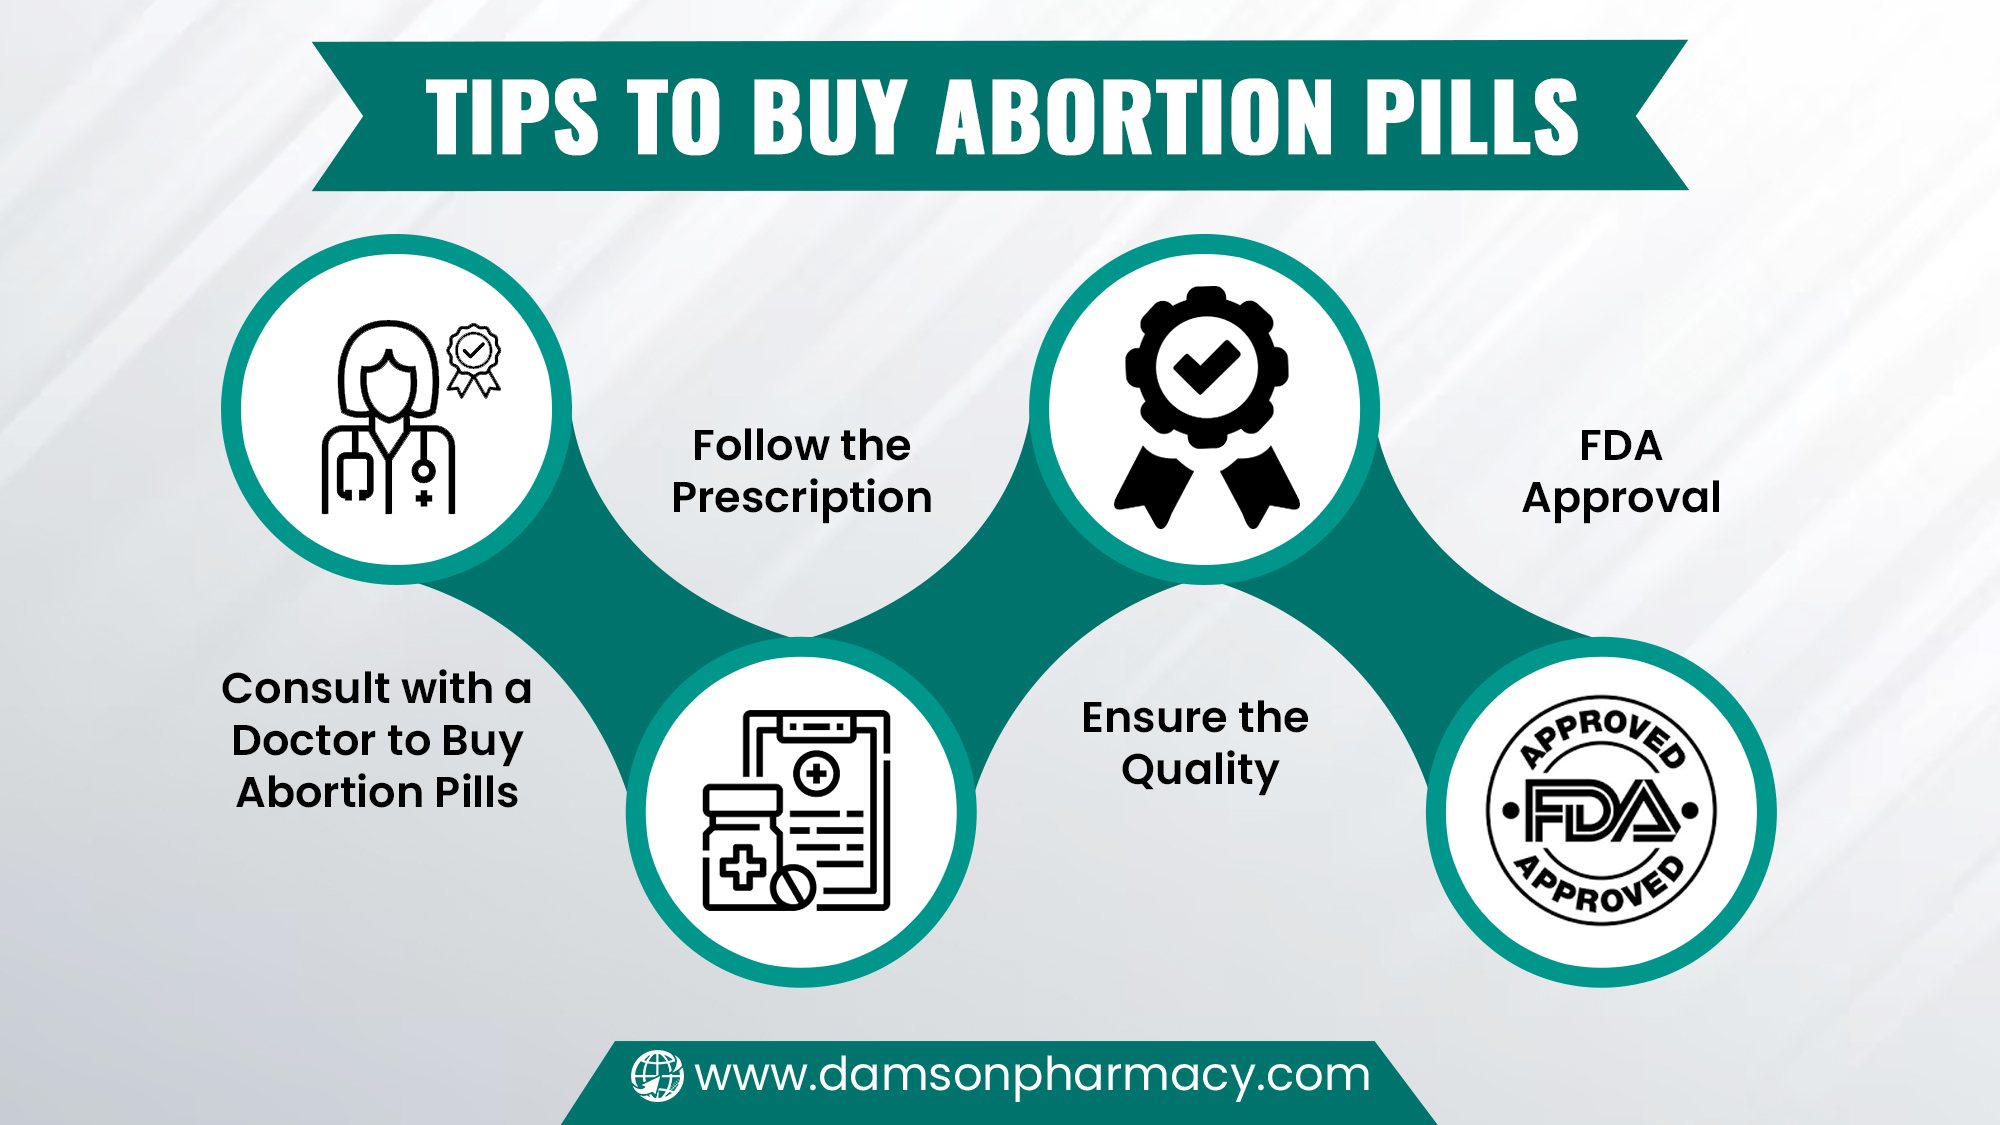 Tips to Buy Abortion Pills